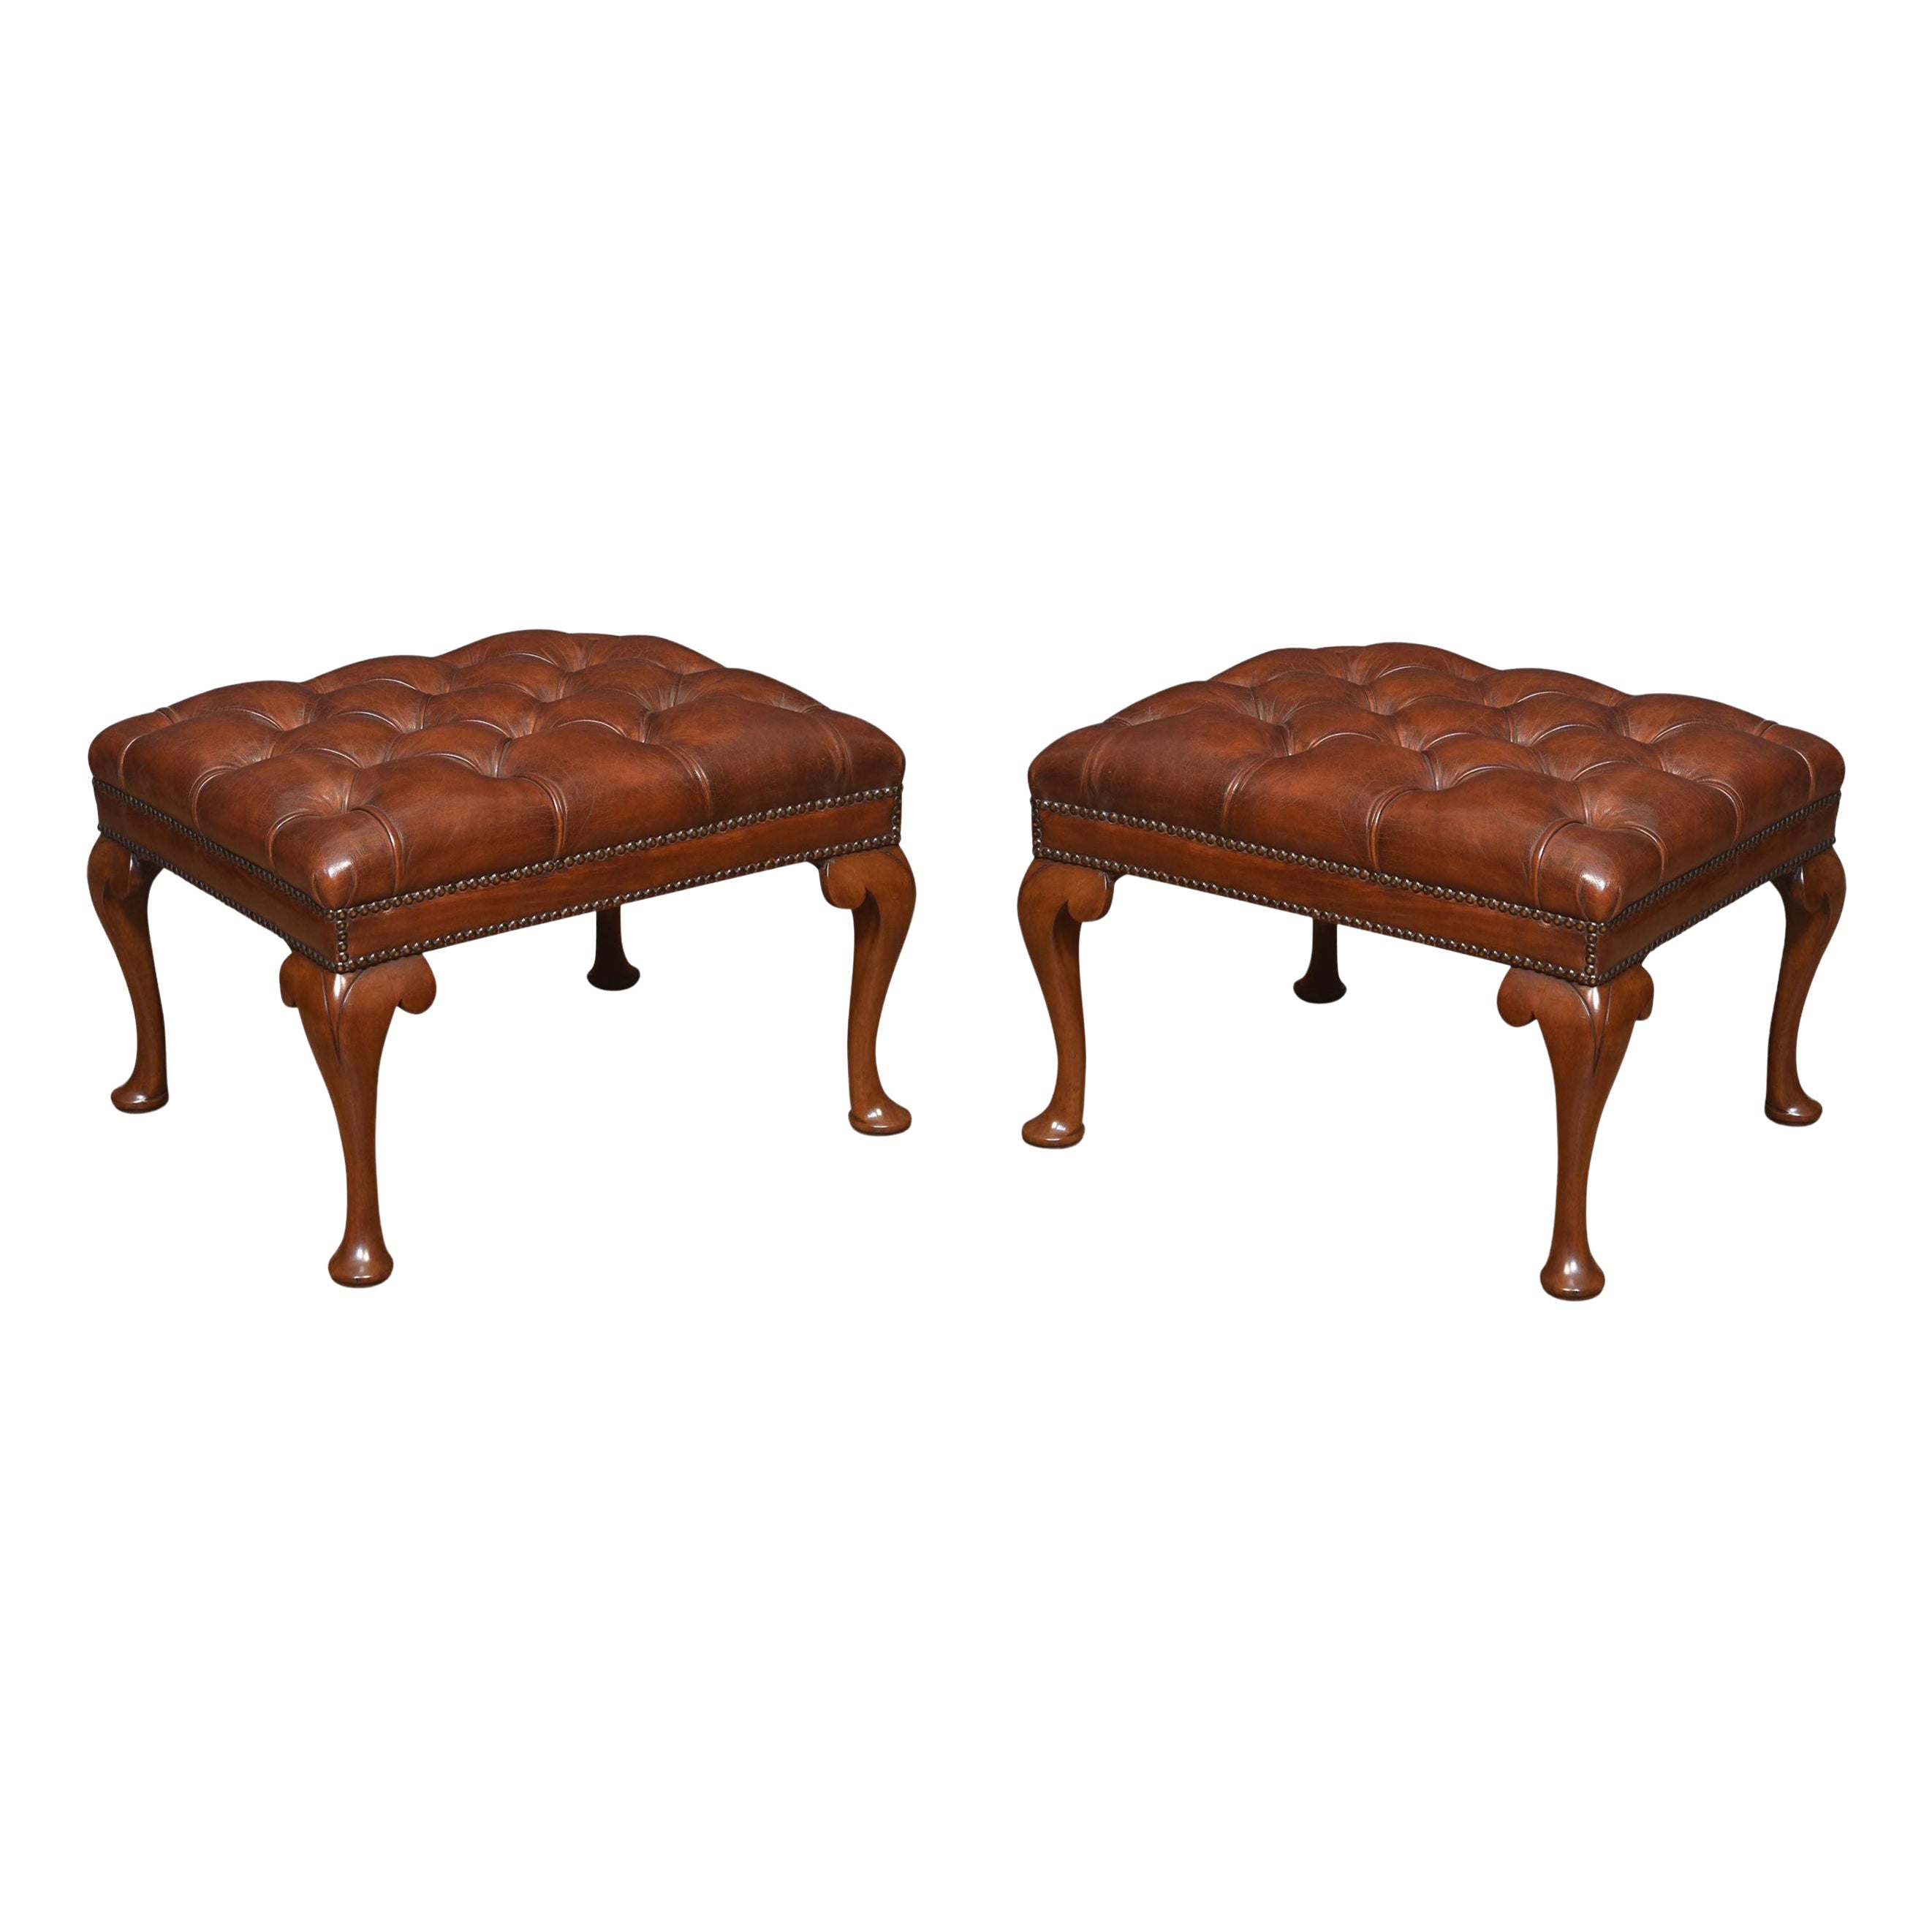 Pair of Leather Uppolstered Stools